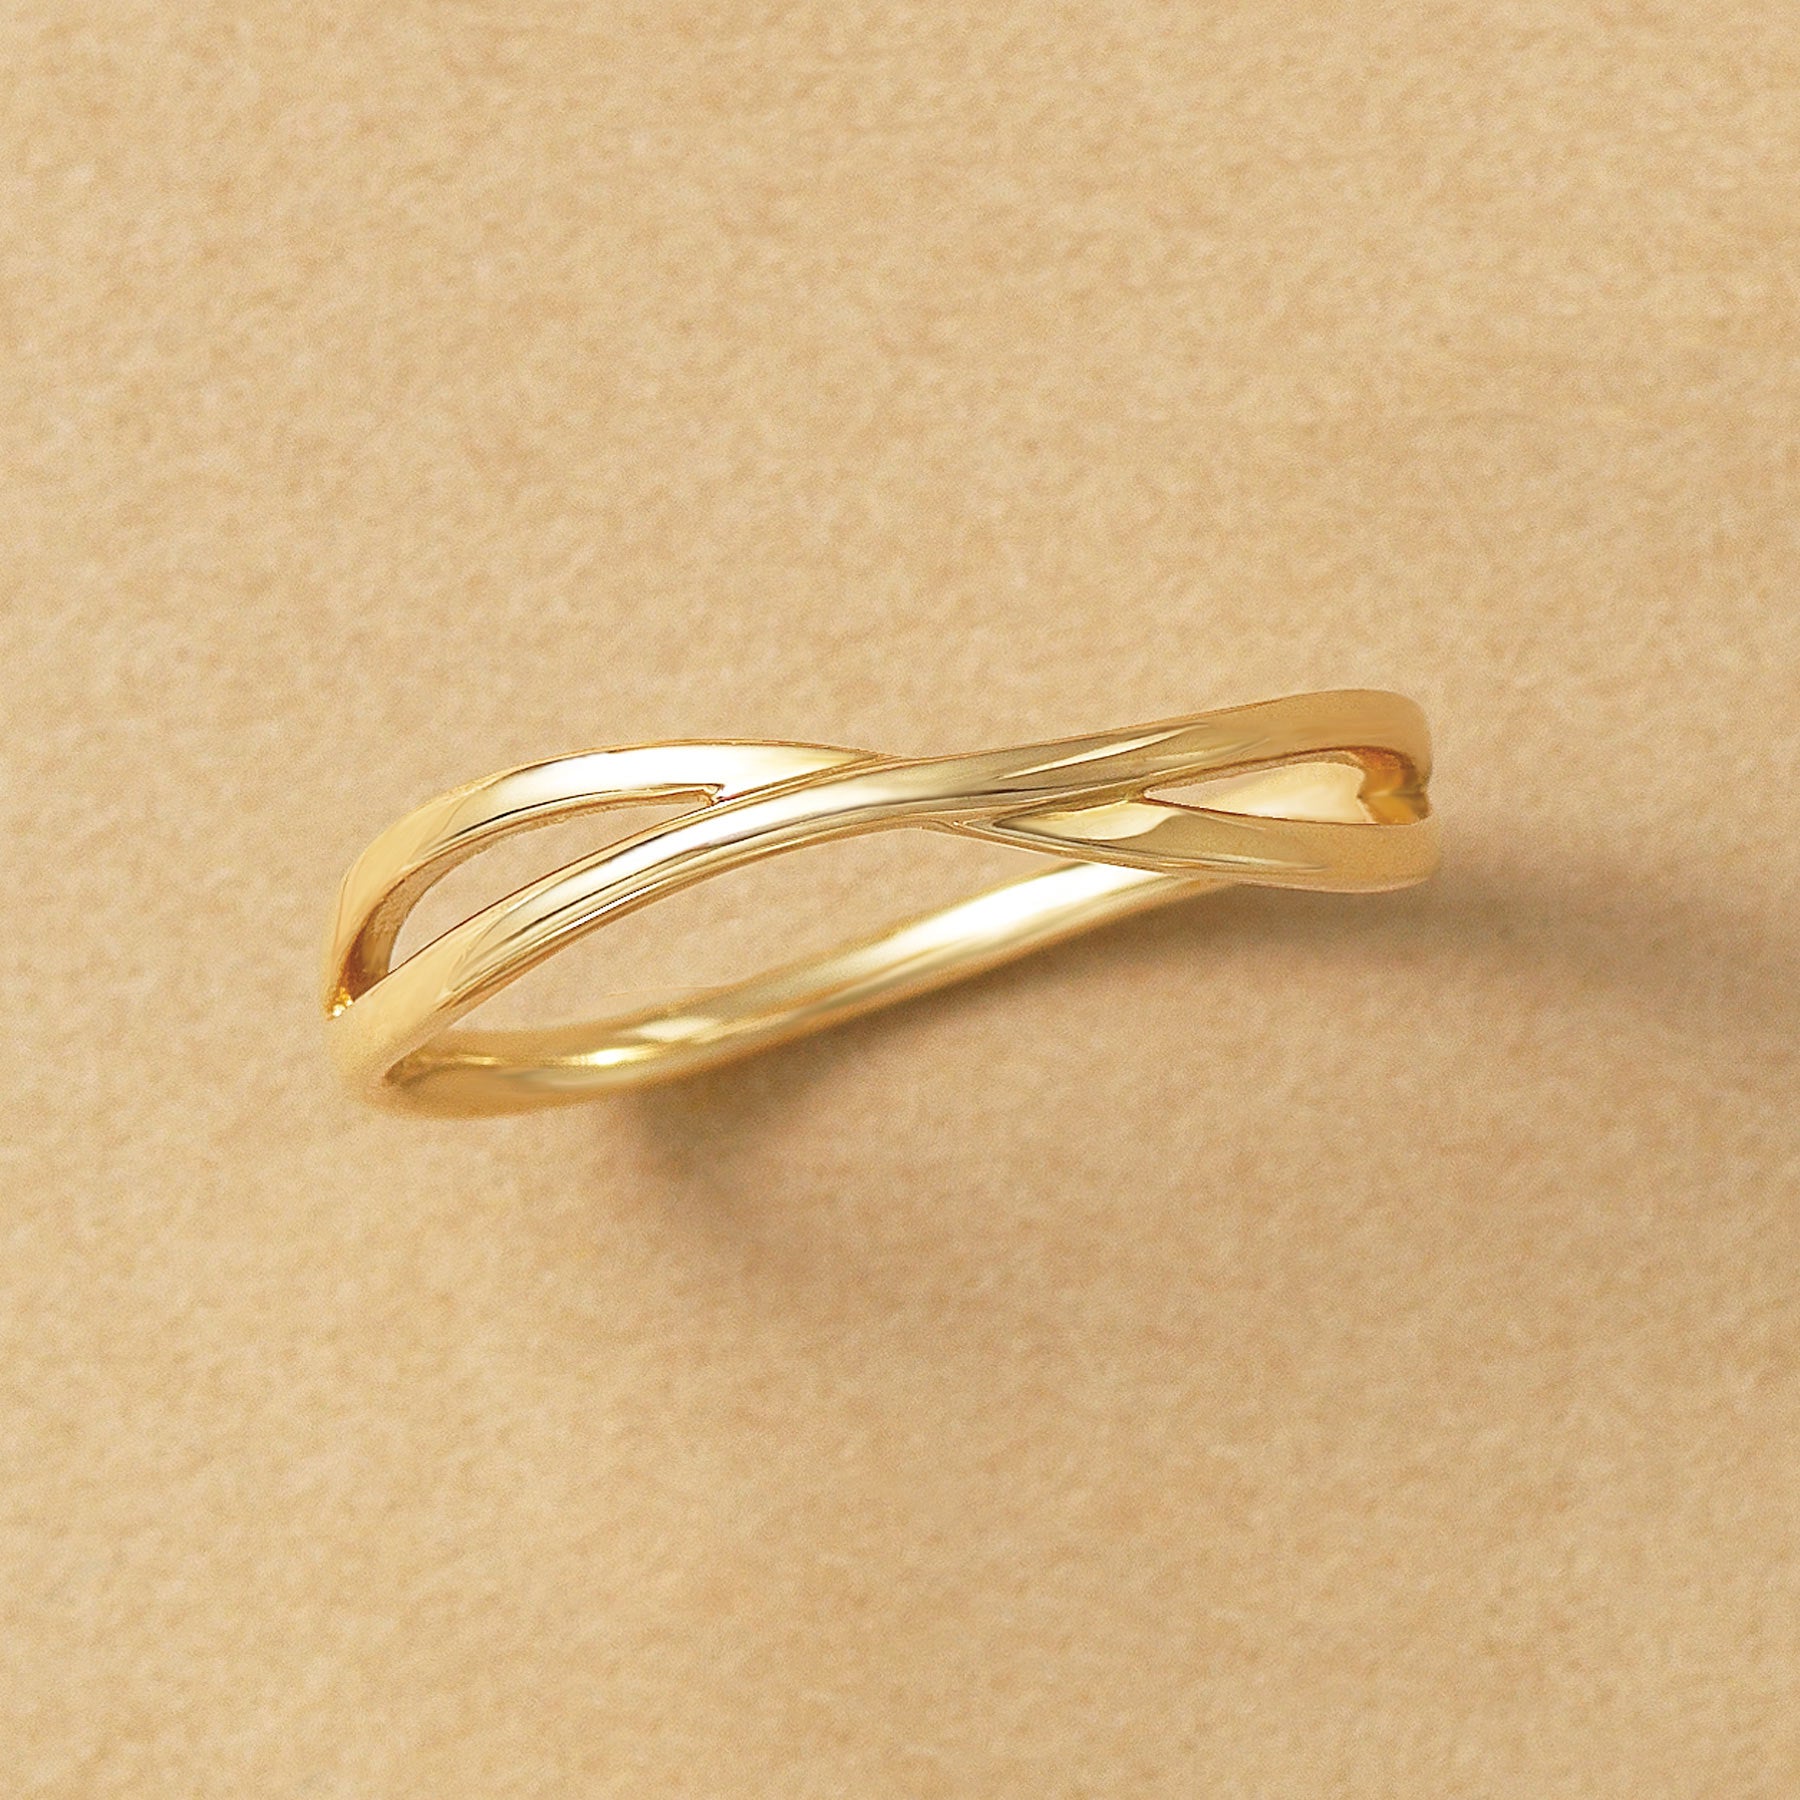 10K Yellow Gold Crossing Wave Ring - Product Image